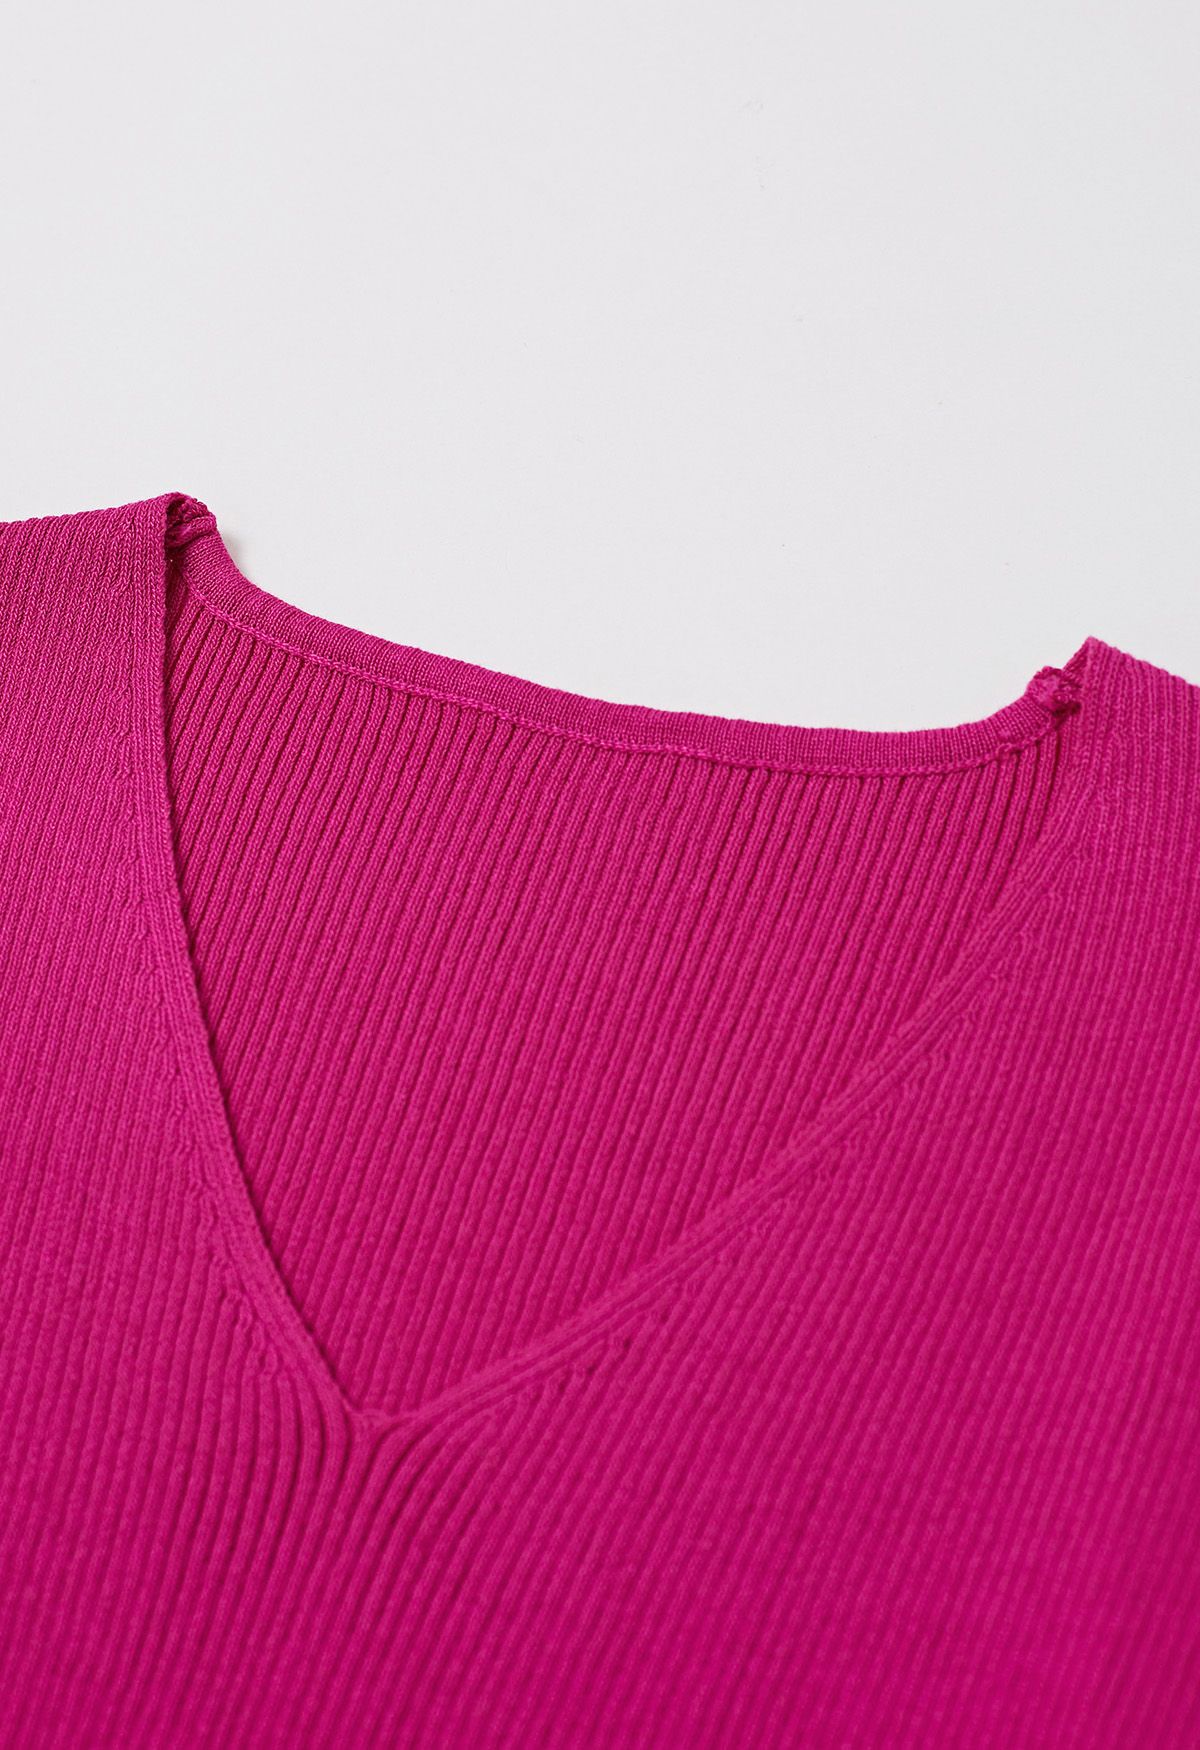 3D Floret Mesh Sleeves Spliced Knit Top in Hot Pink